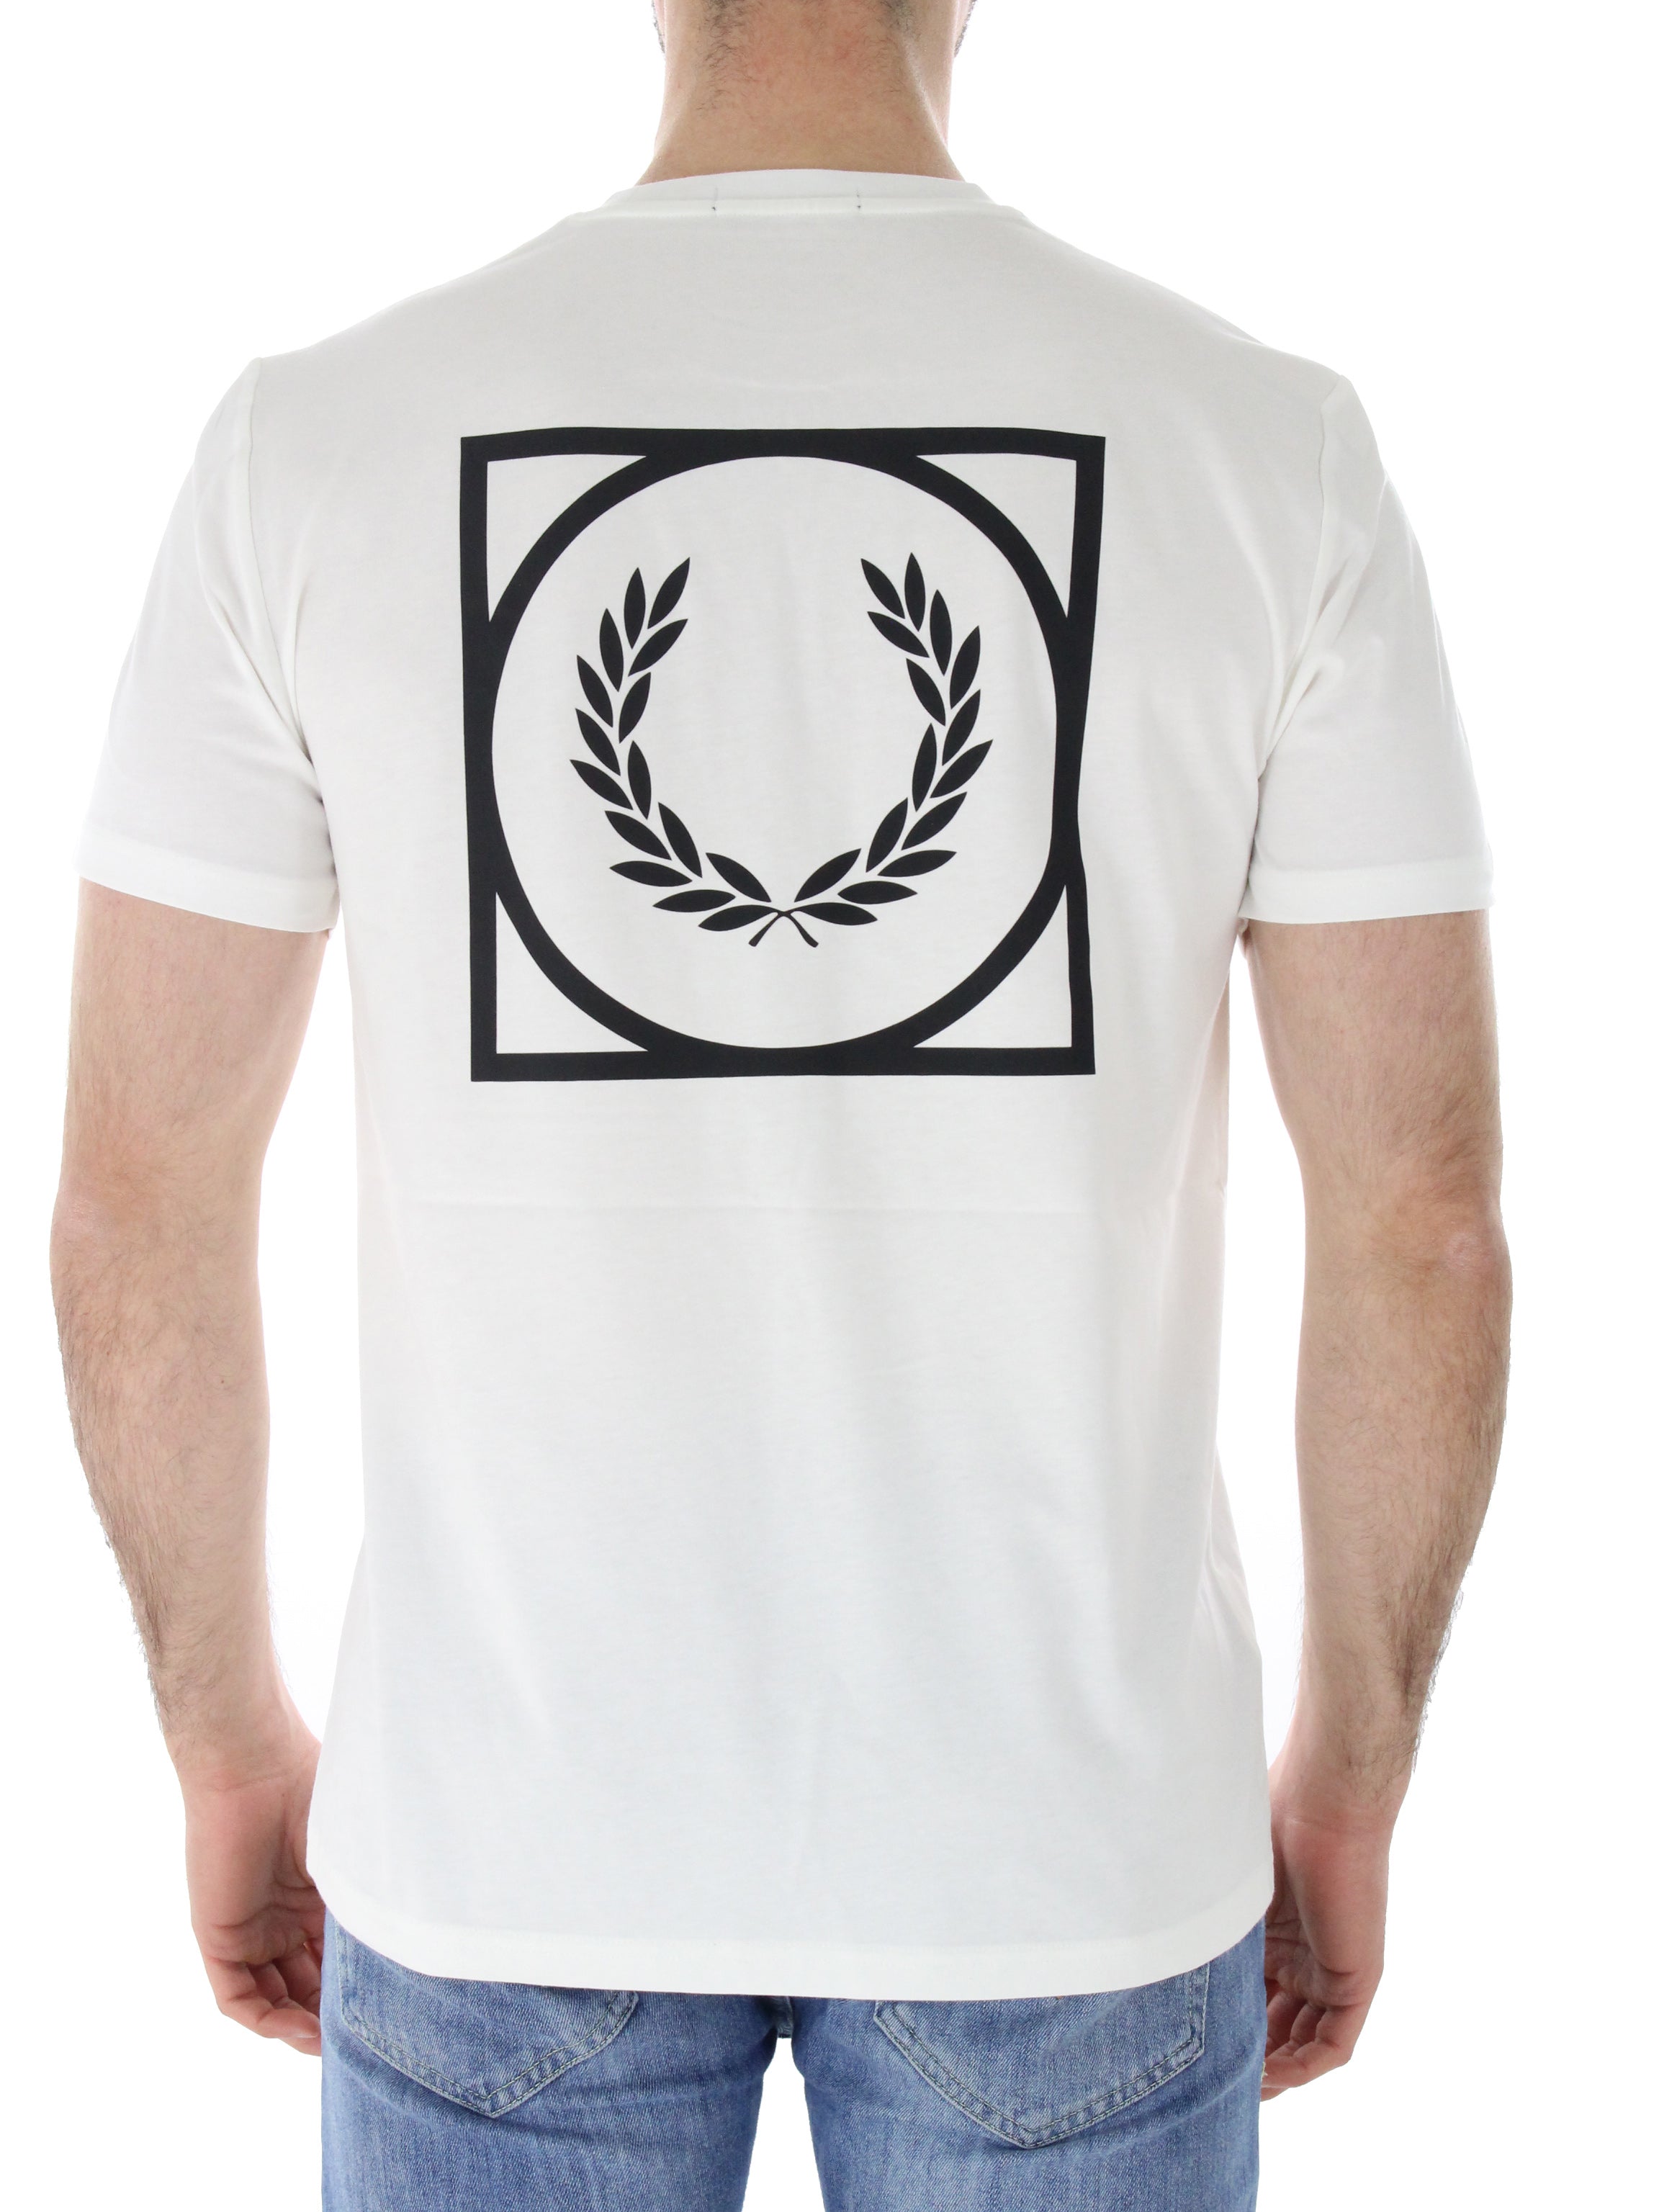 Fred perry t-shirt